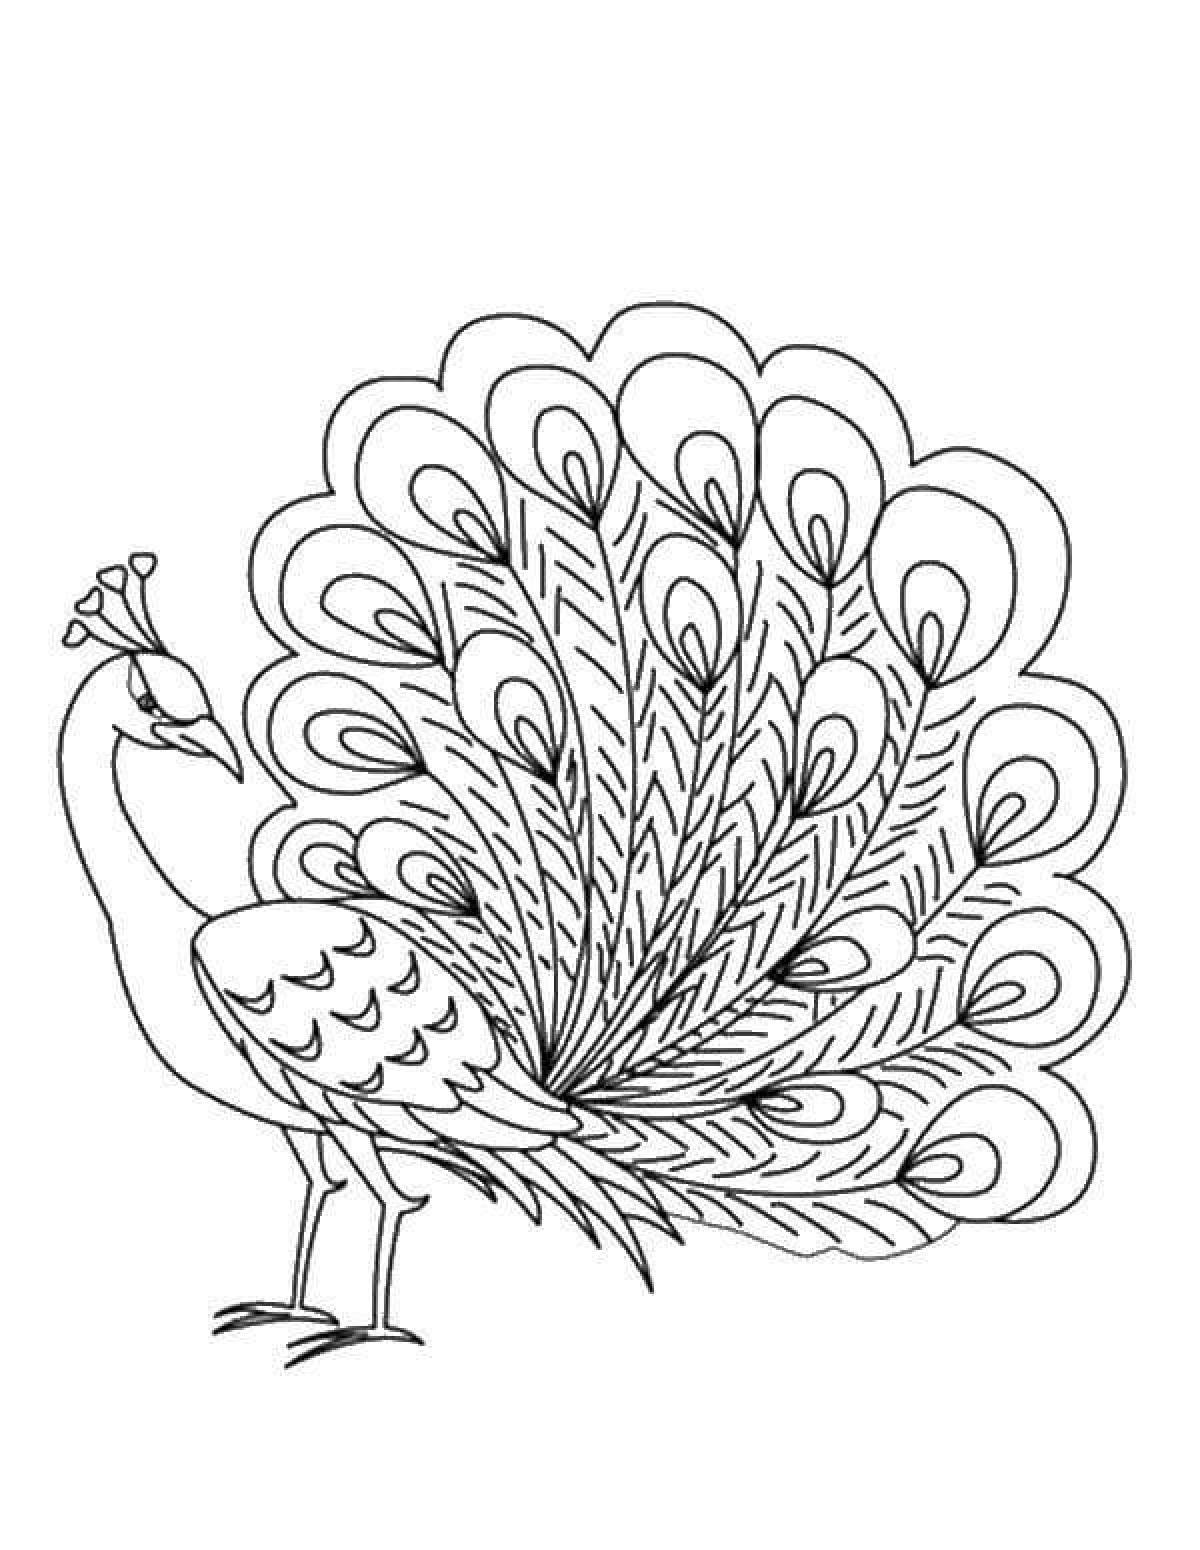 Funny firebird coloring book for kids